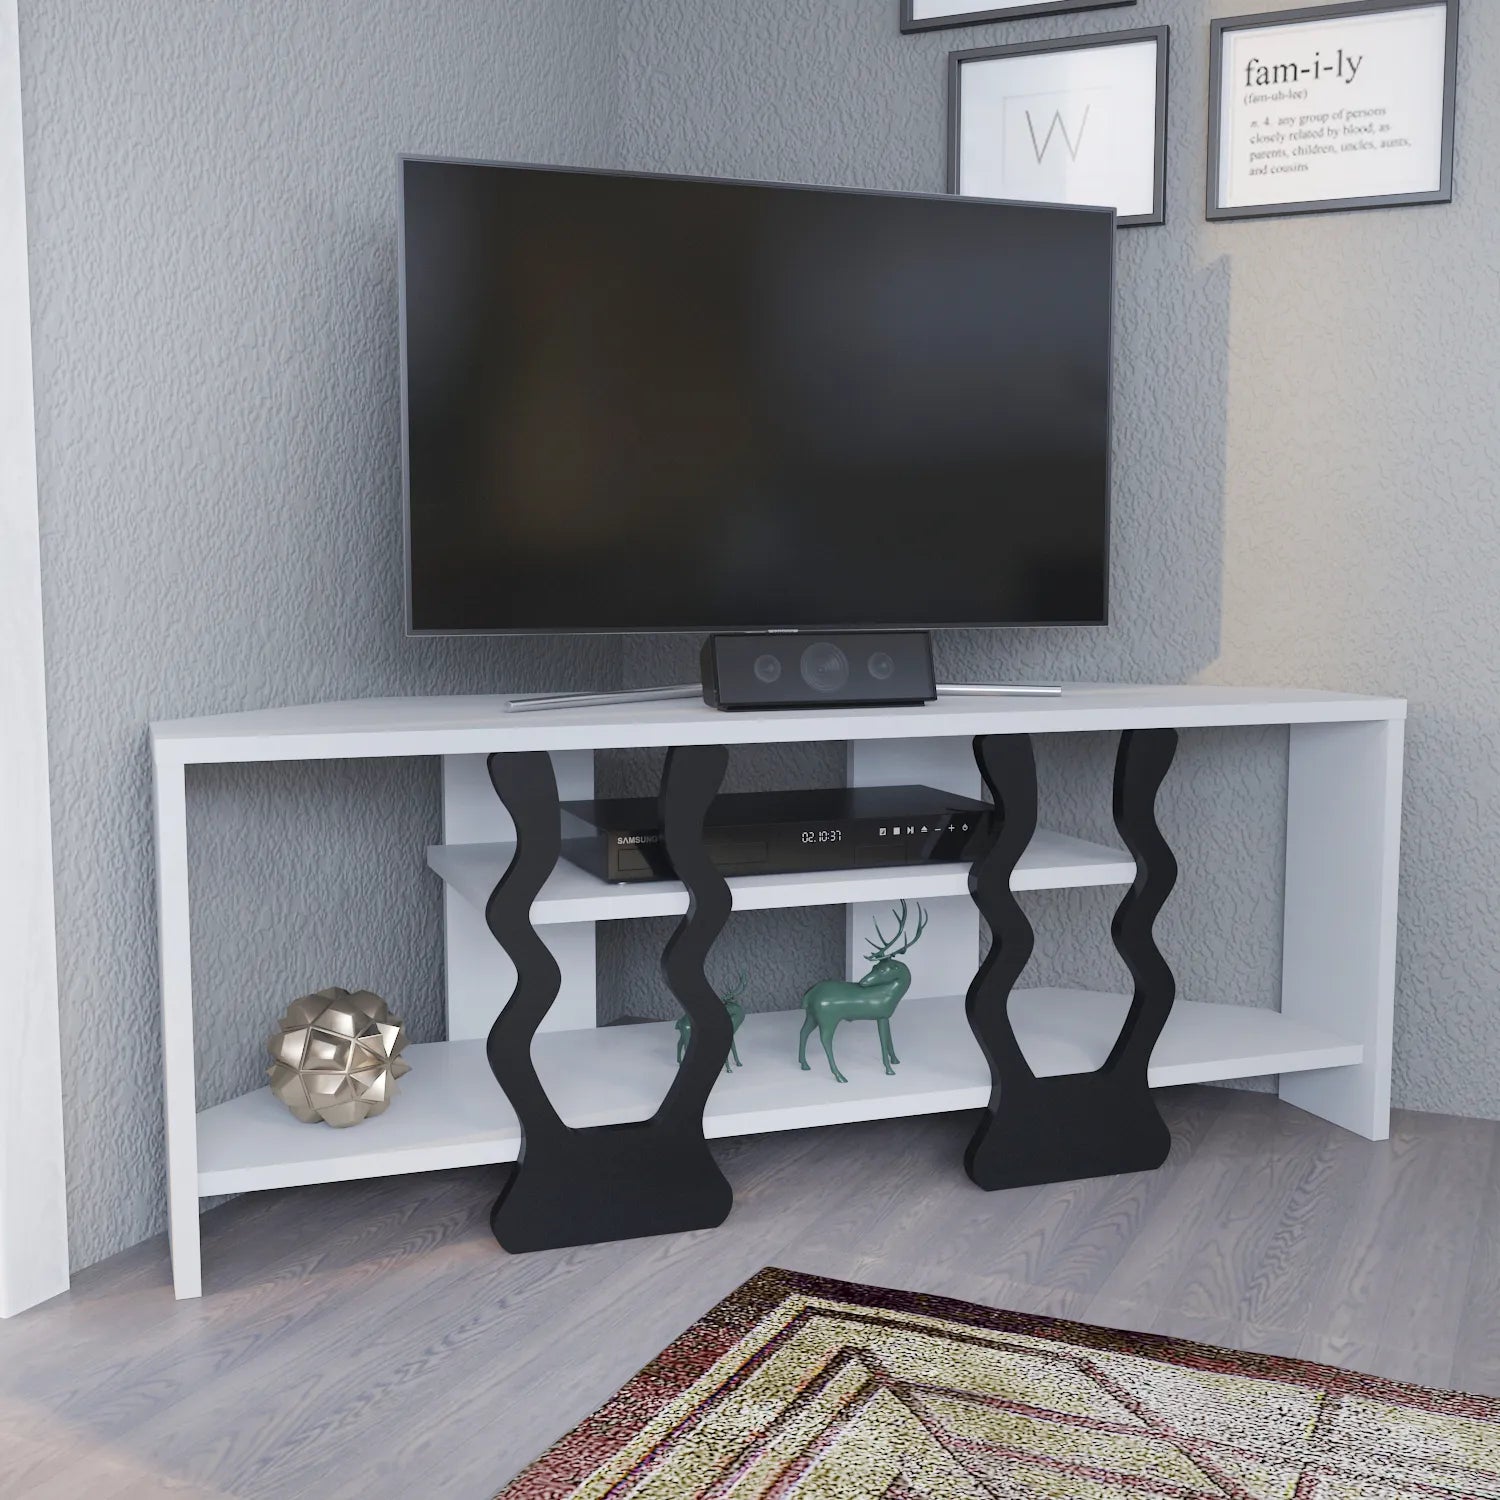 Firal 43 inch Wide Corner TV Stand Media Console for TVs up to 49 inch